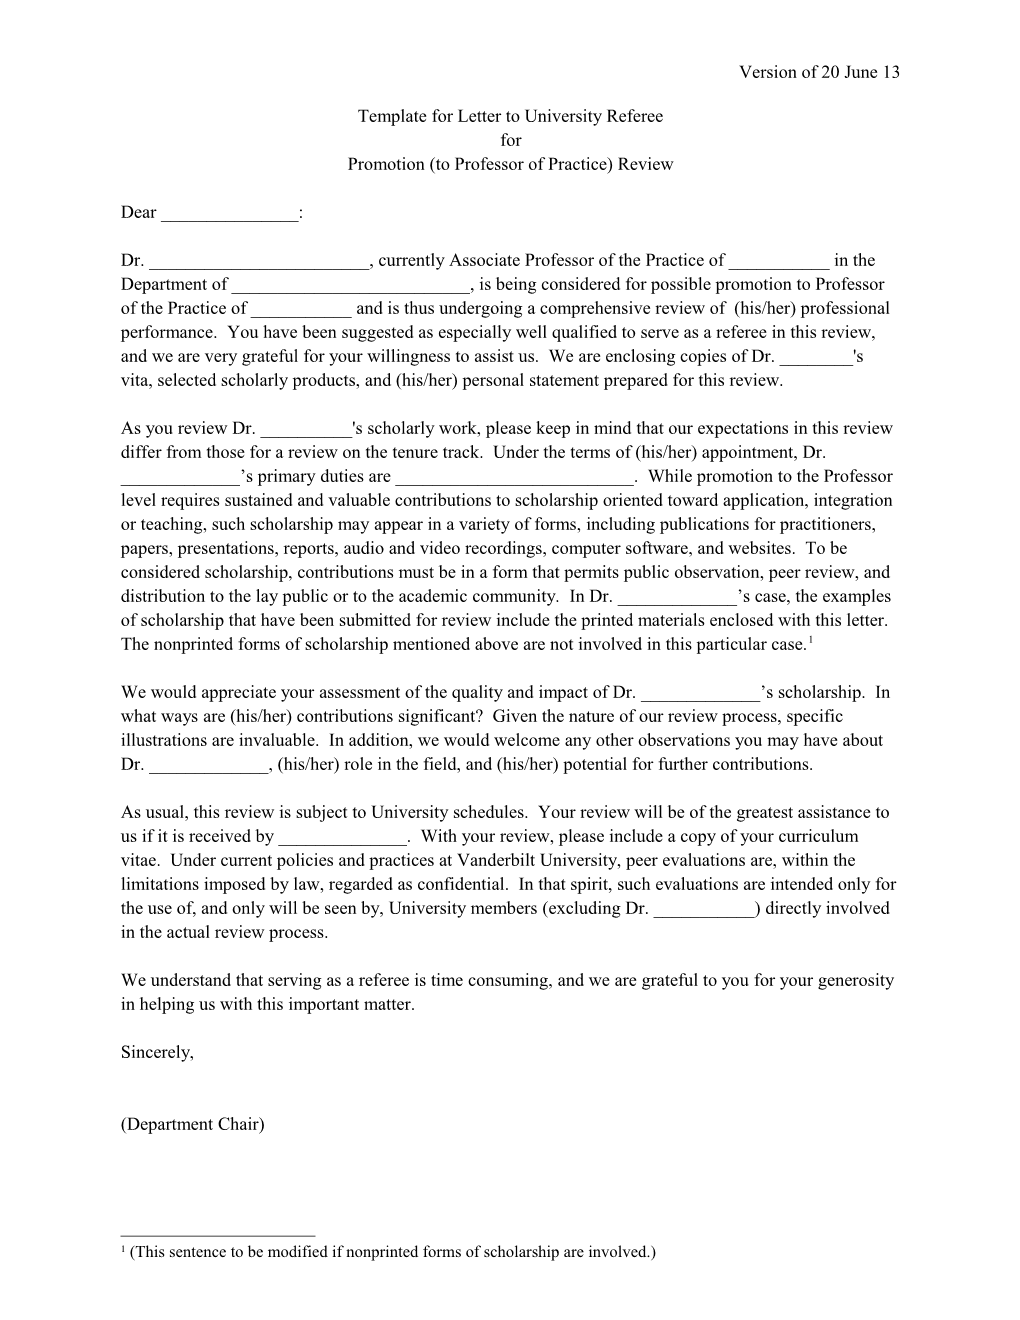 General Form of Letter to Faculty Referee